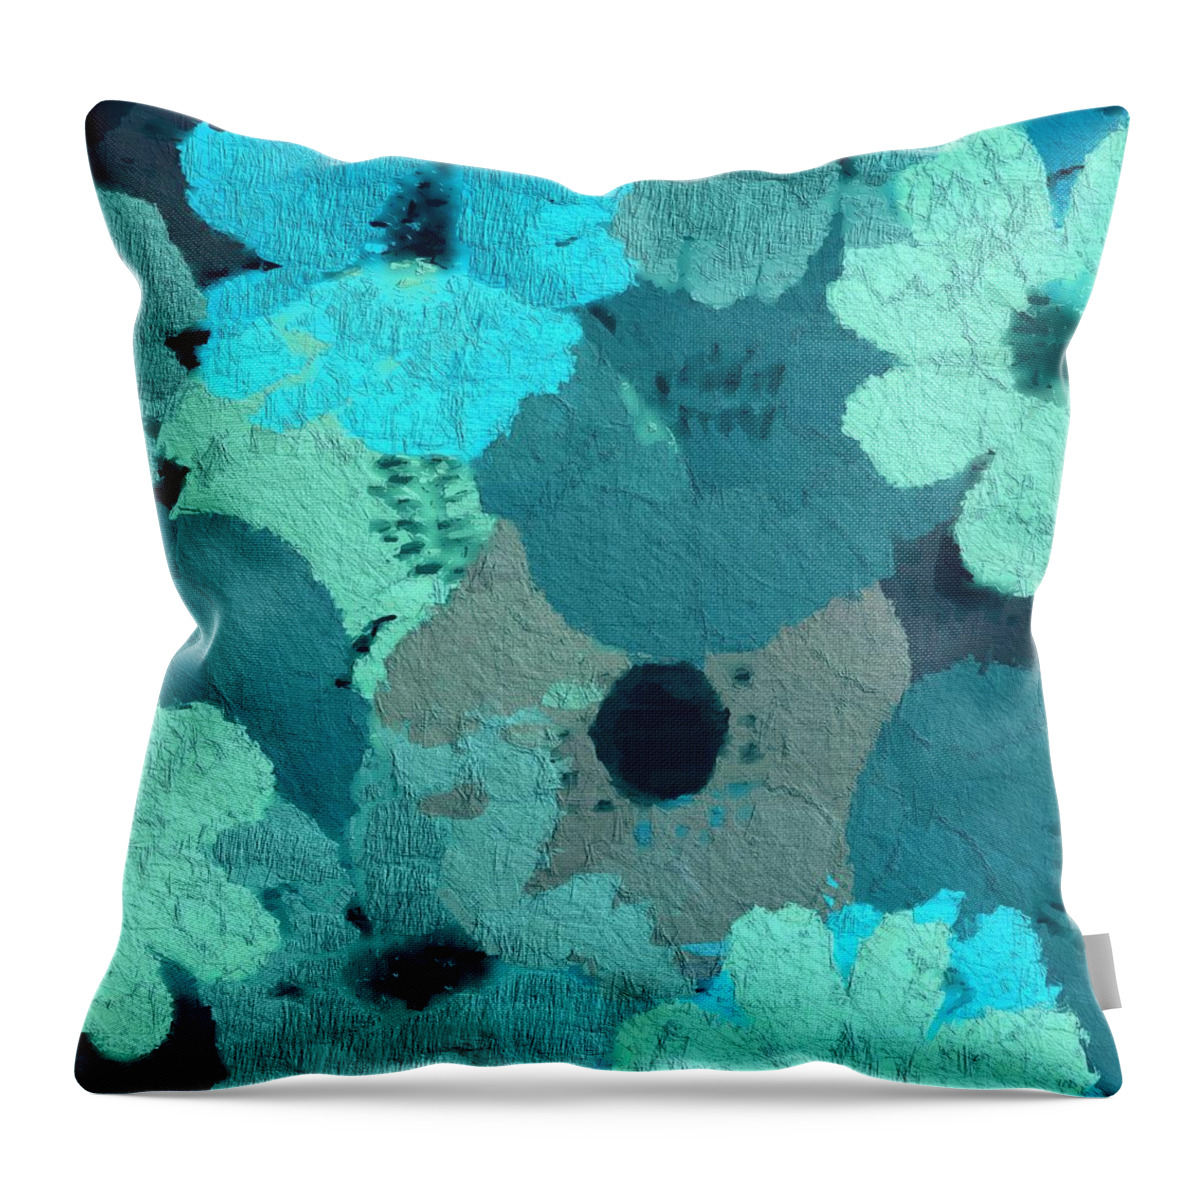 Painting Throw Pillow featuring the painting Textured Floral Watercolor by Bonnie Bruno